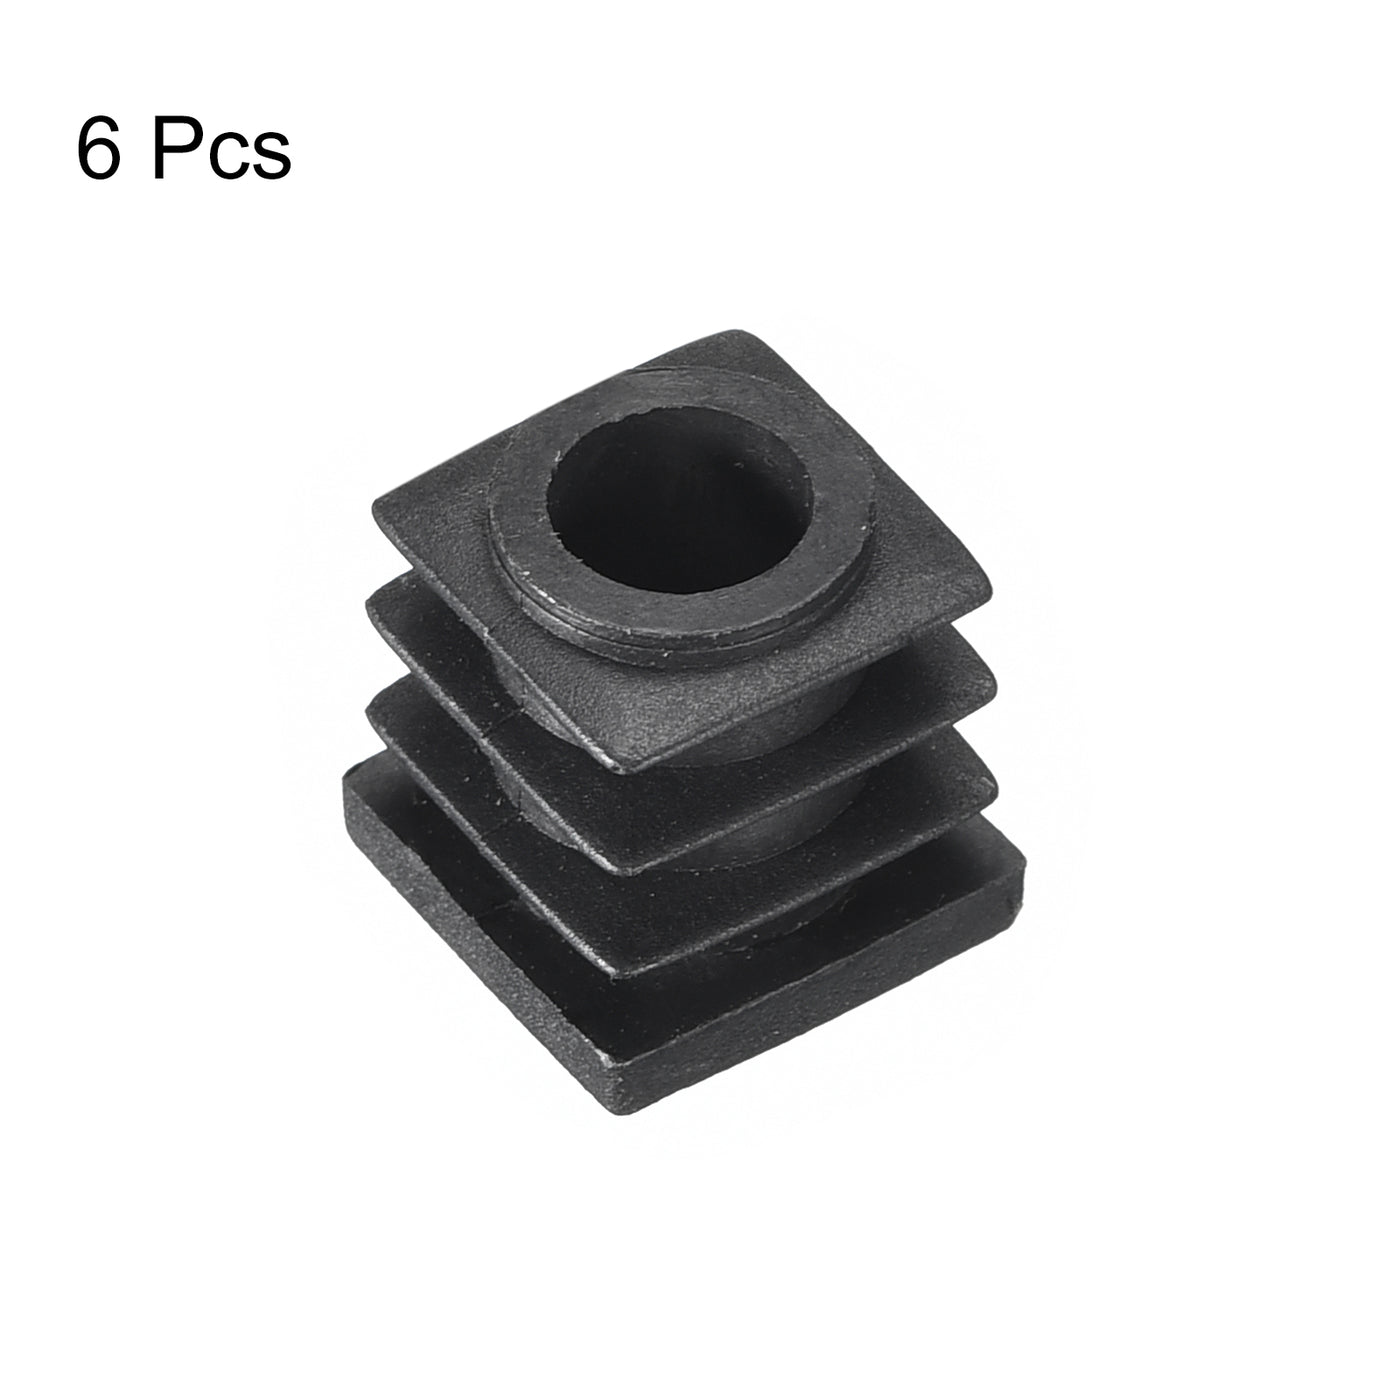 uxcell Uxcell 6Pcs 0.63"x0.63" Caster Insert with Thread, Square M6 Thread for Furniture